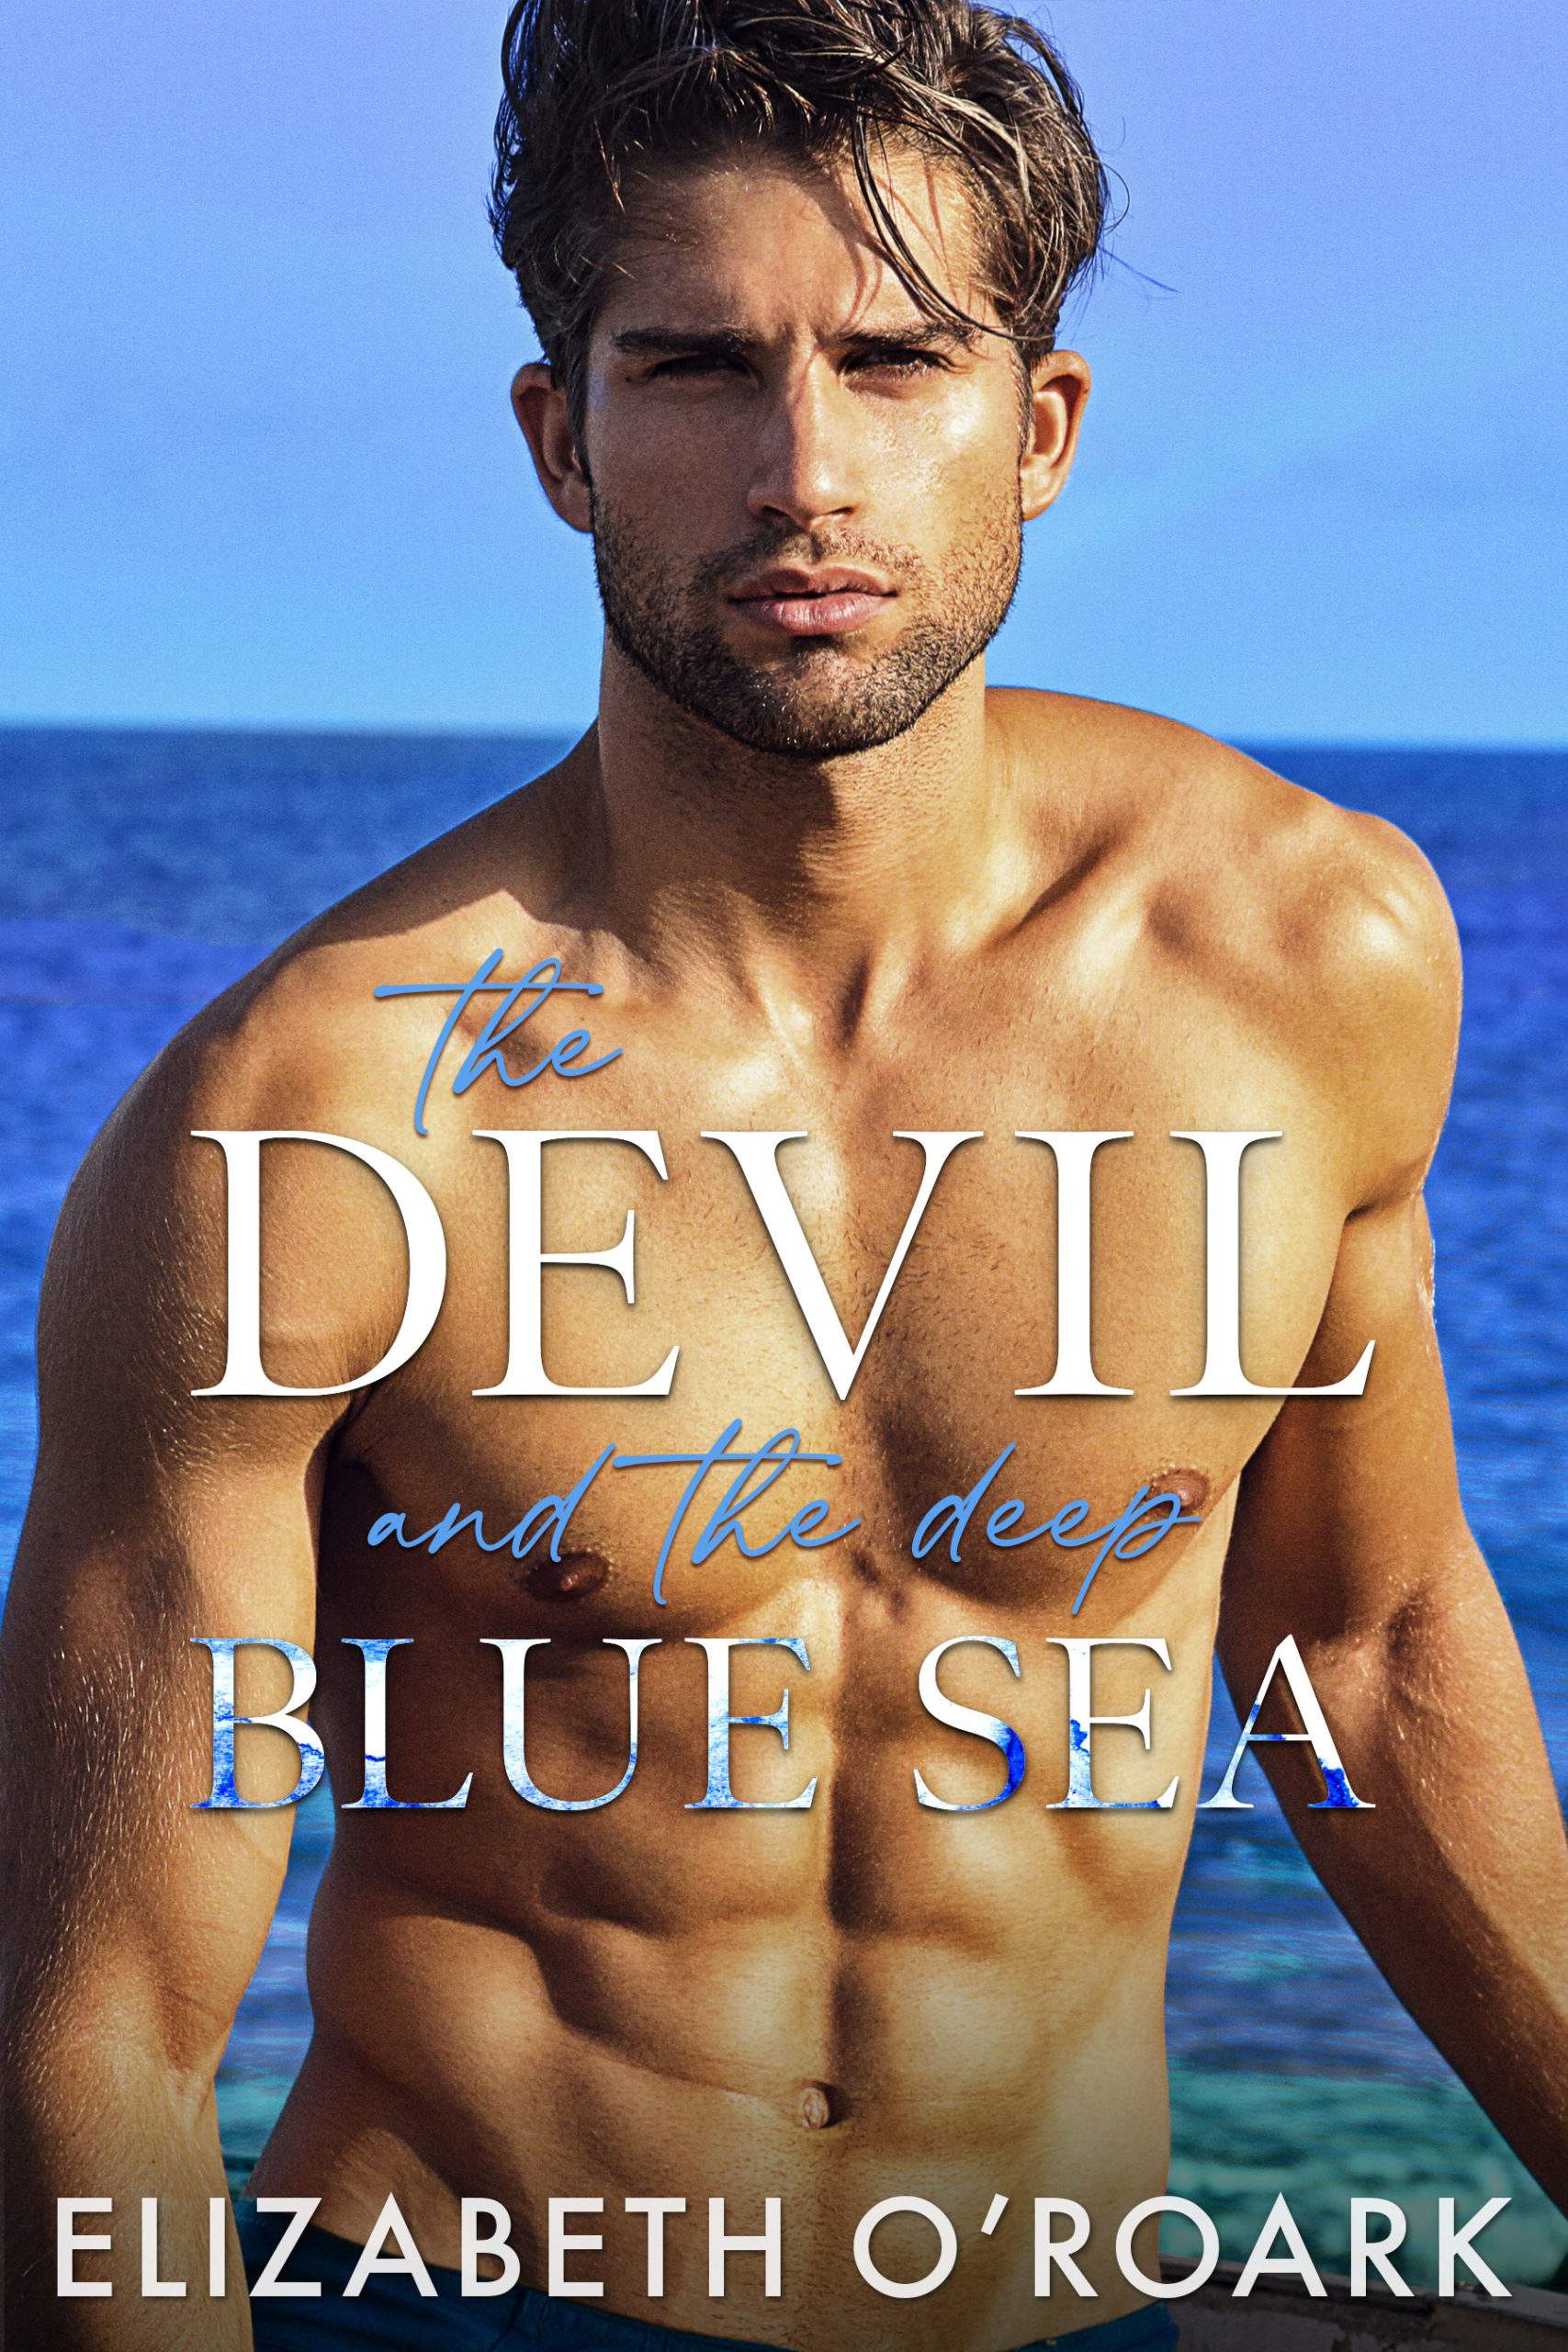 The Devil and the Deep Blue Sea by Elizabeth O’Roark